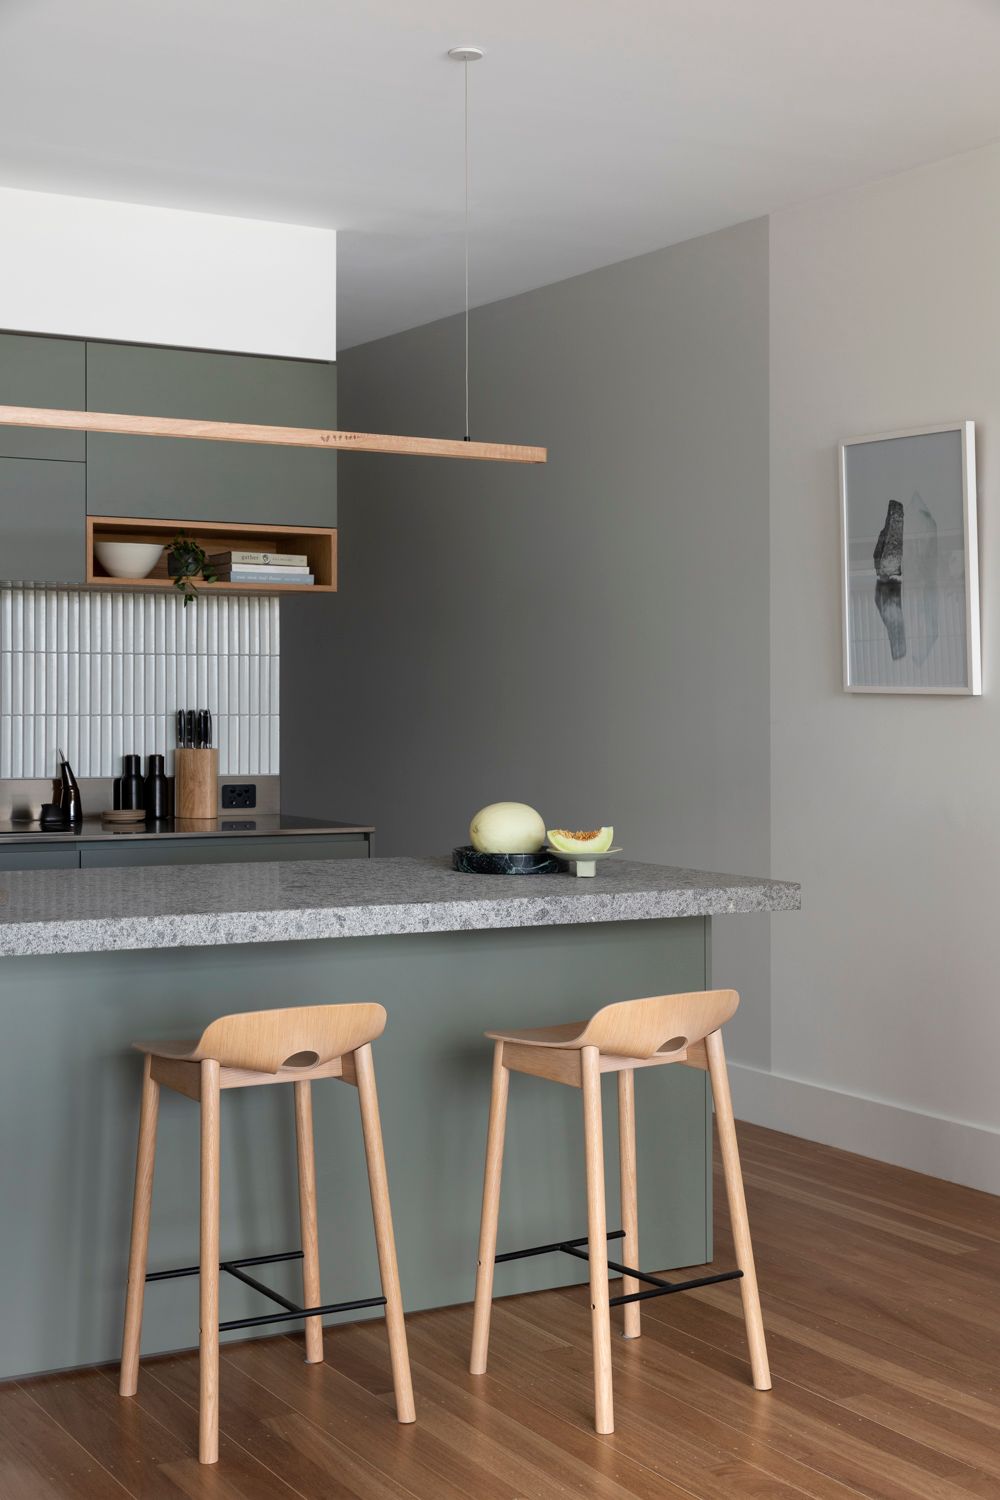 Fluxwood Hollow Pendant. Photography by Martina Gemmola. The Hollow is a versatile solid timber pendant. The singular LED strip lighting creates a functional yet statement light source that is perfect over kitchen islands and workspaces like it is positioned in this setting above kitchen island bench 